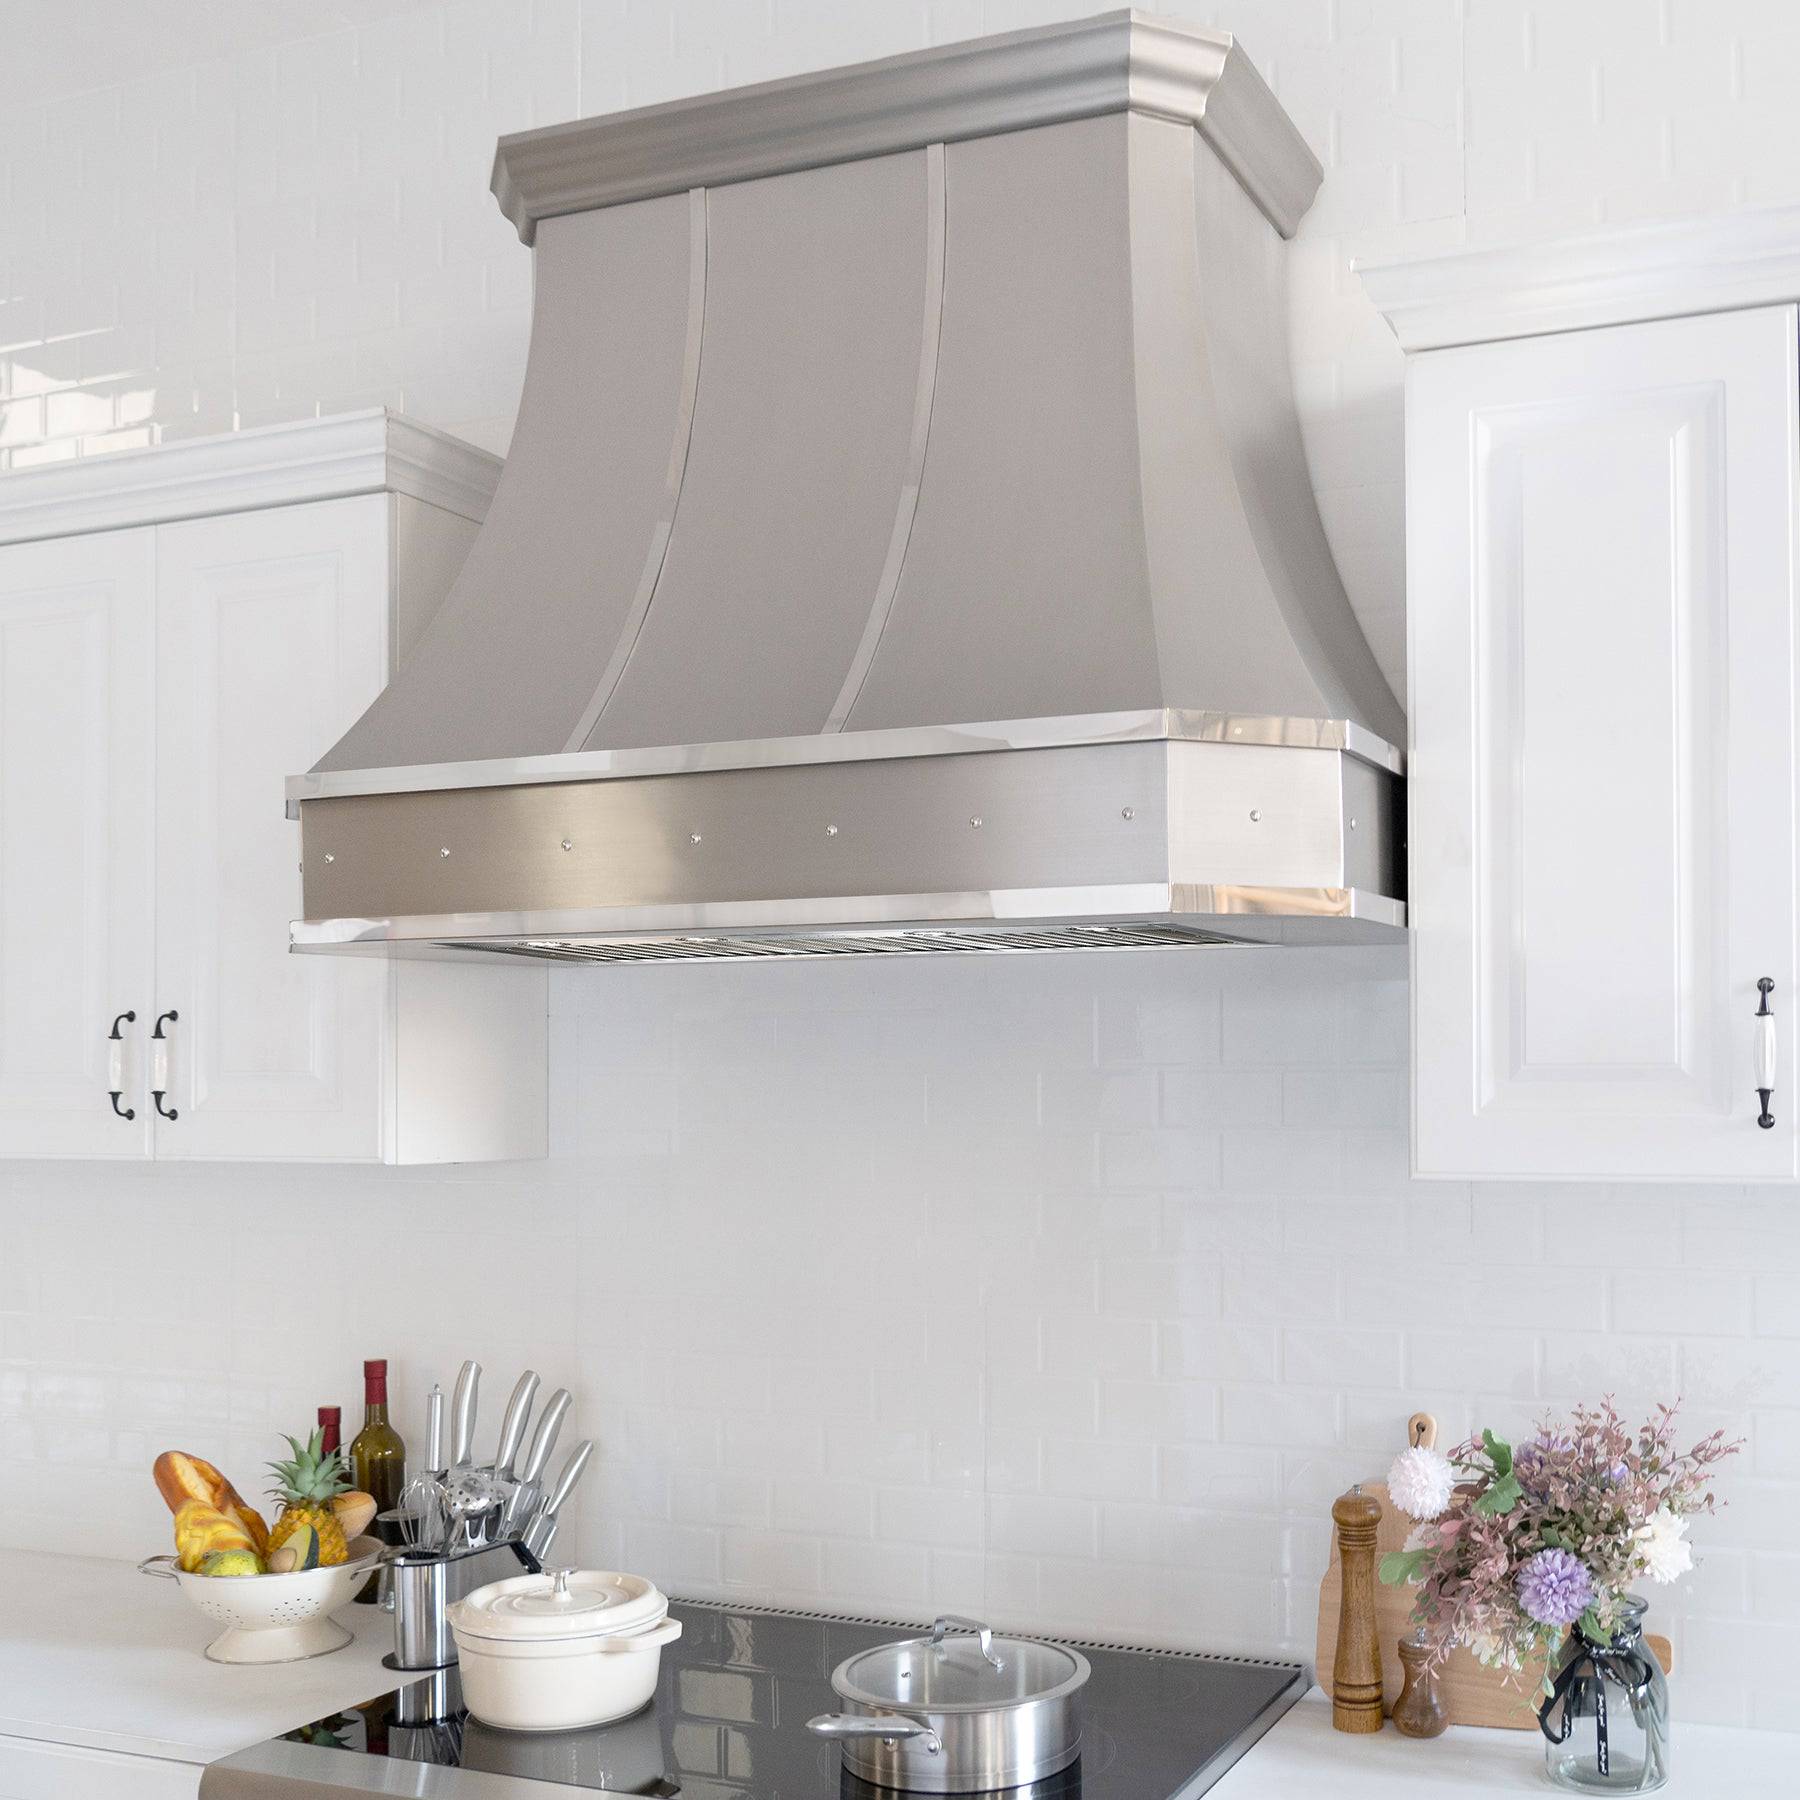 Fobest Custom Curved Stainless Steel Kitchen Hood with Cornered Crown FSS-111 - Stainless Steel Range Hood-Fobest Appliance